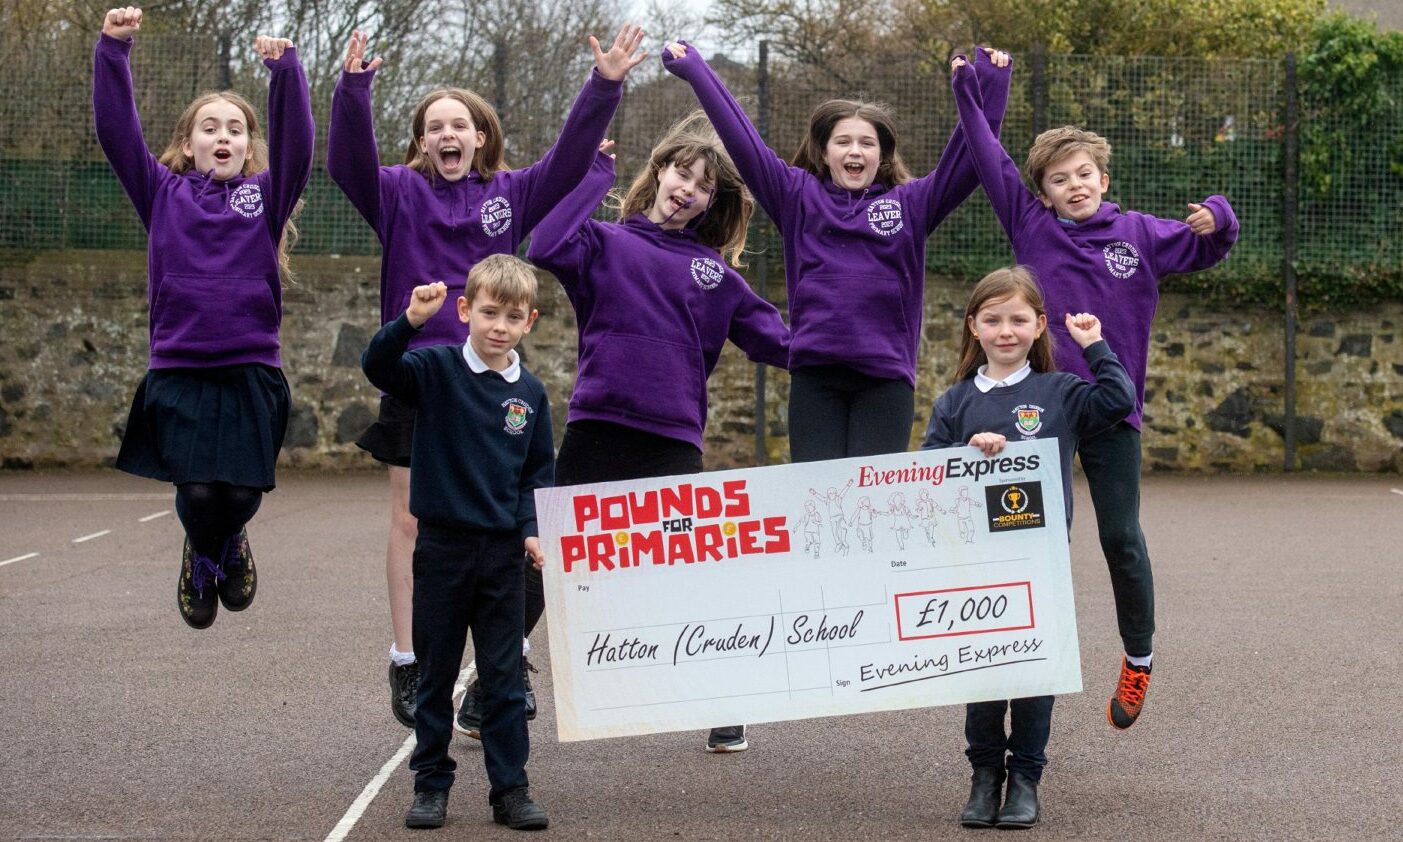 Pounds for Primaries winners from Hatton (Cruden) school jump for joy with their £1,000 cheque.